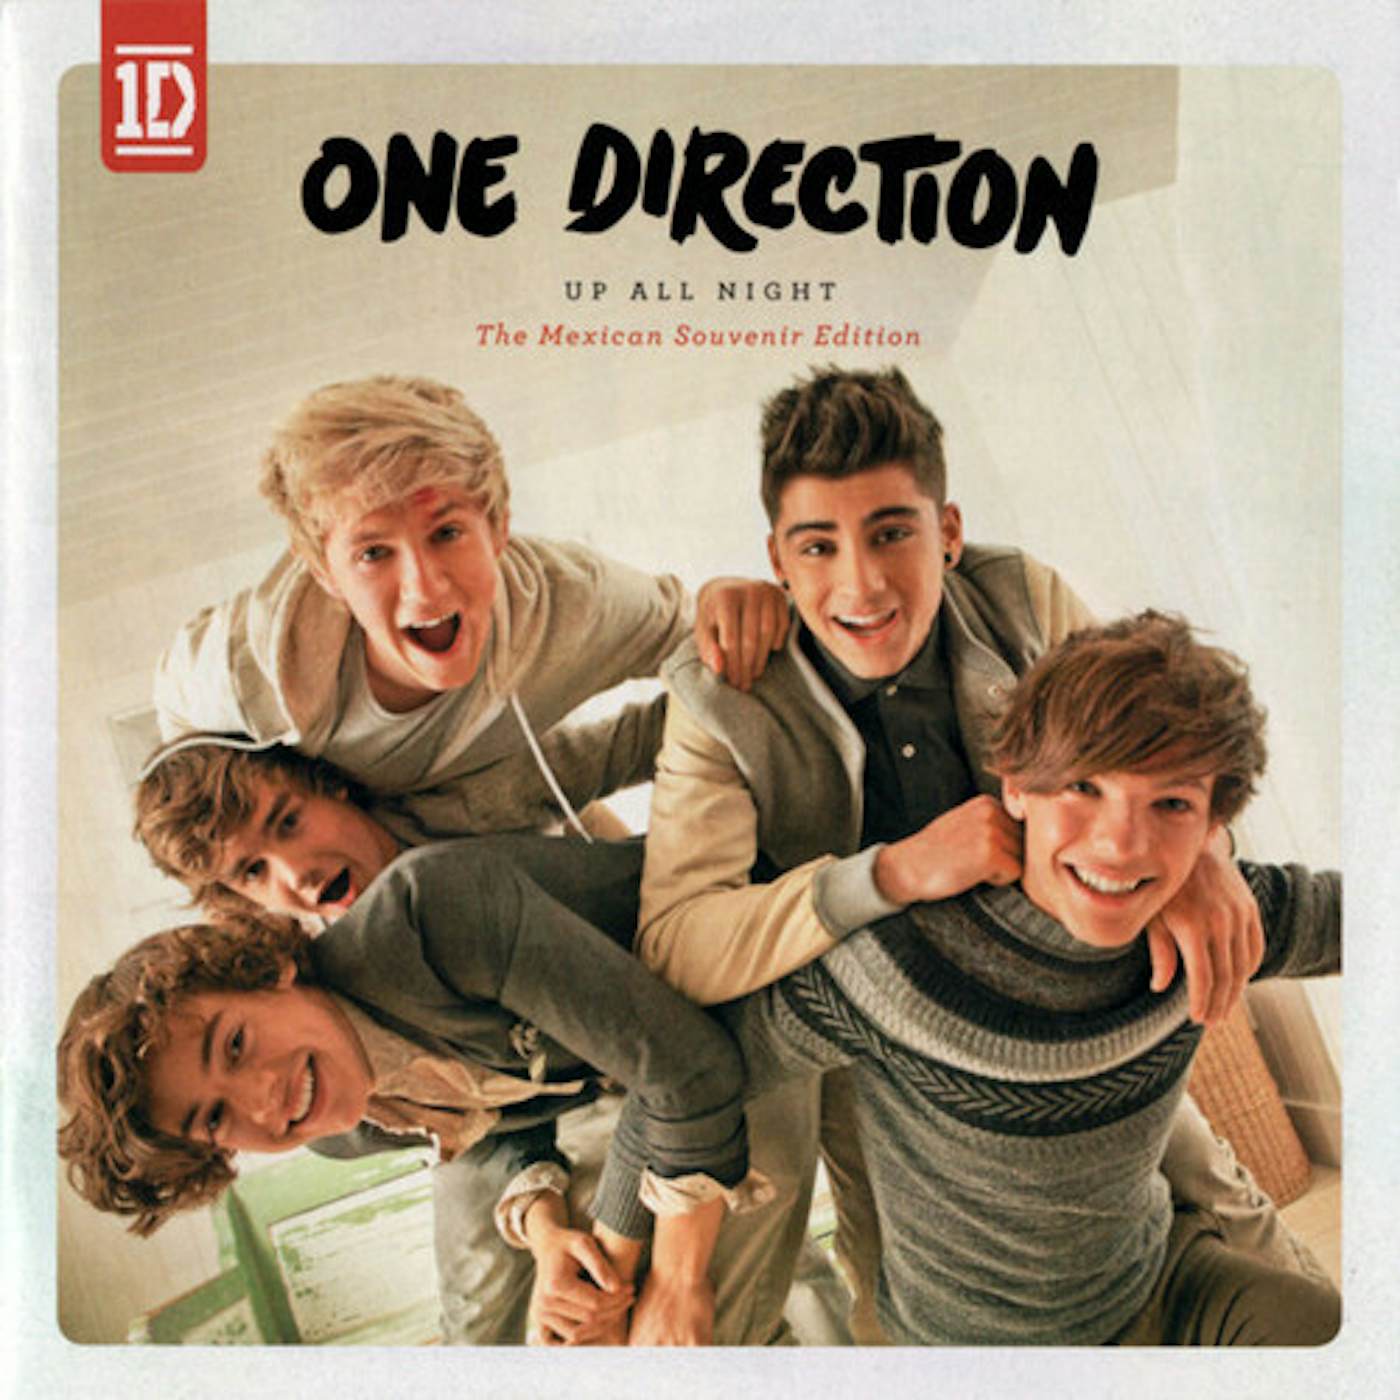 One Direction UP ALL NIGHT: THE MEXICAN SOUVENIR EDITION CD